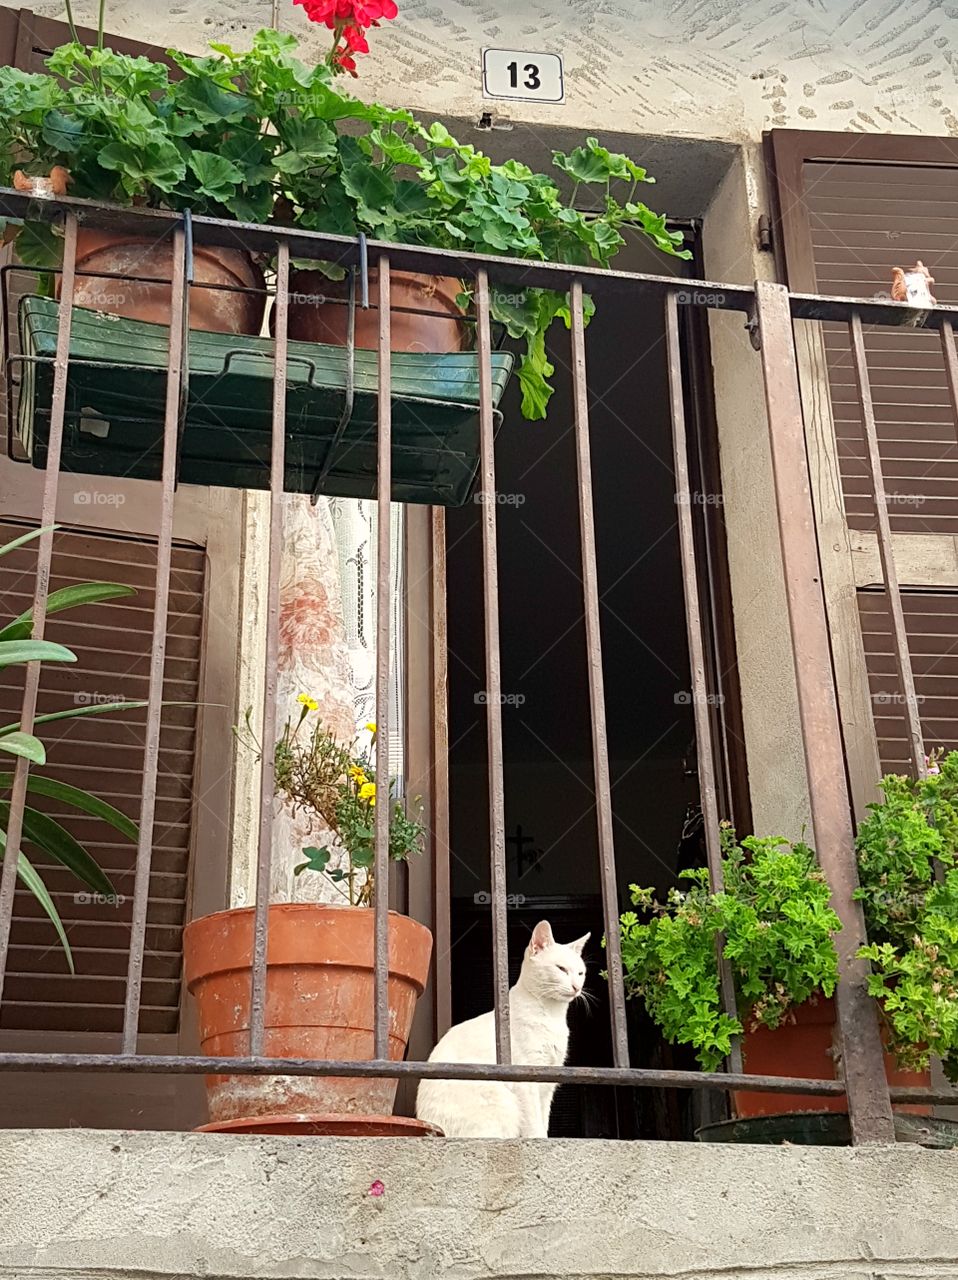 White cat watching around on a balcony with potted plants